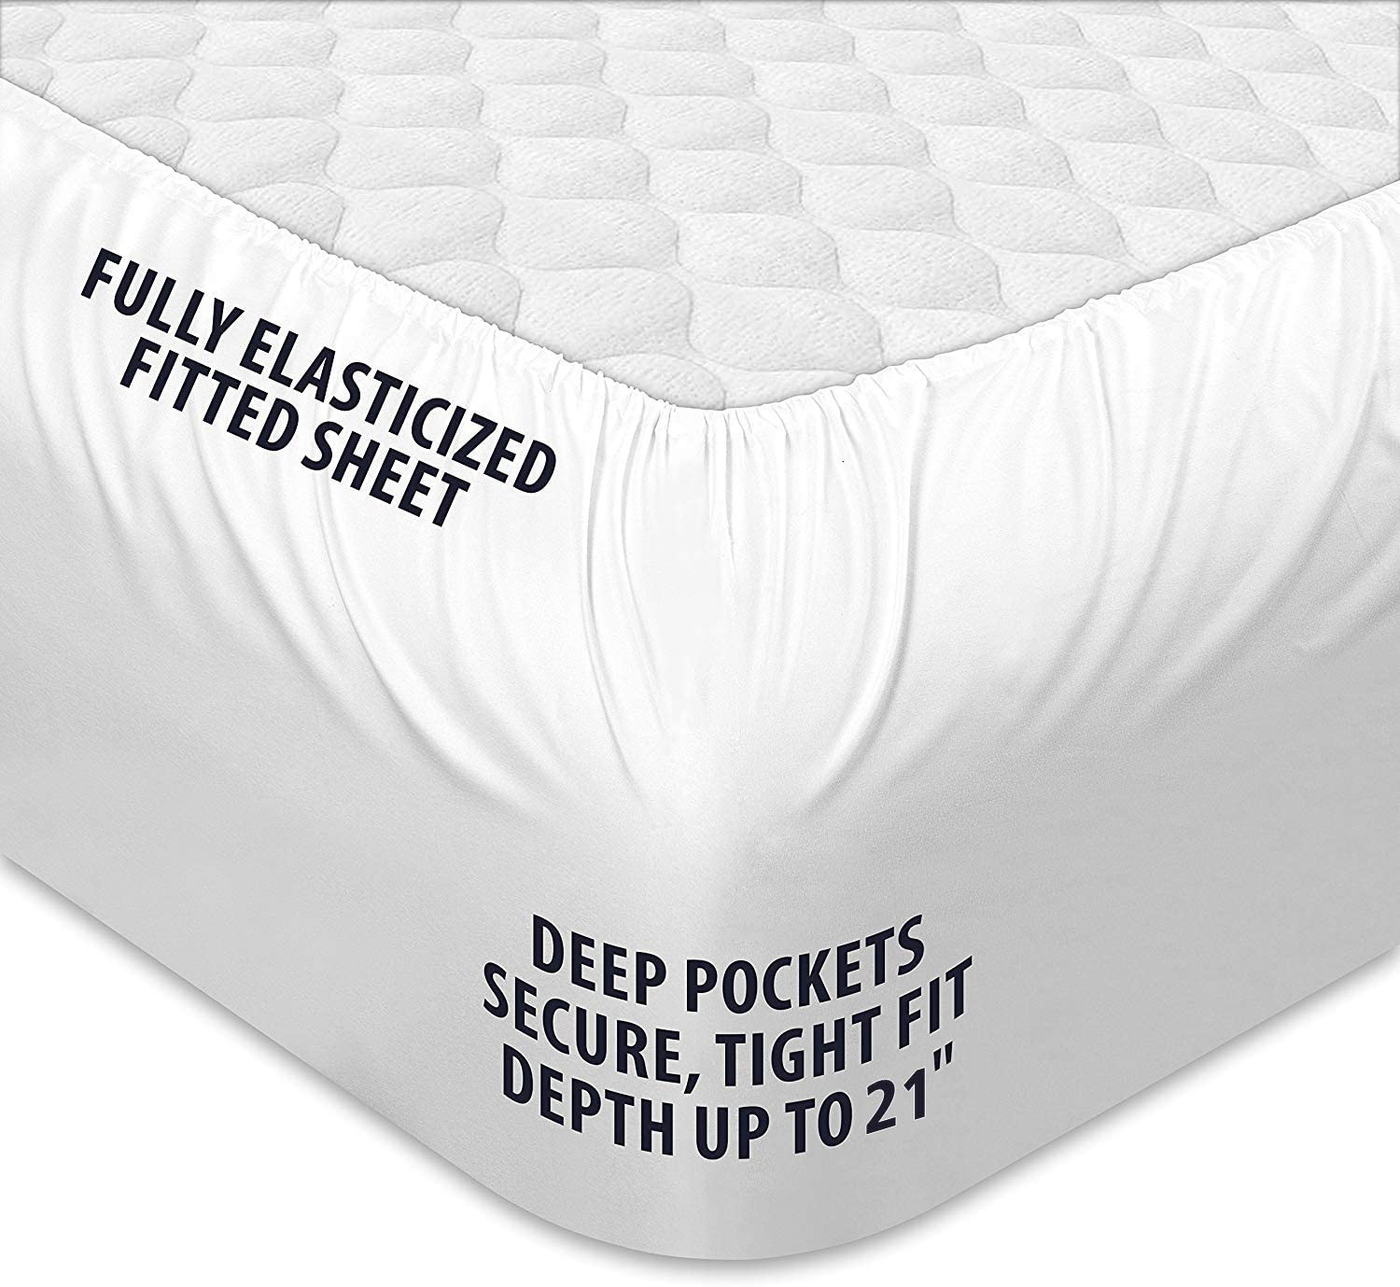 TEXARTIST Queen Mattress Pad Cover Cooling Mattress Topper 400 TC Cotton Pillow Top Mattress Cover Quilted Fitted Mattress Protector with 8-21 Inch Deep Pocket